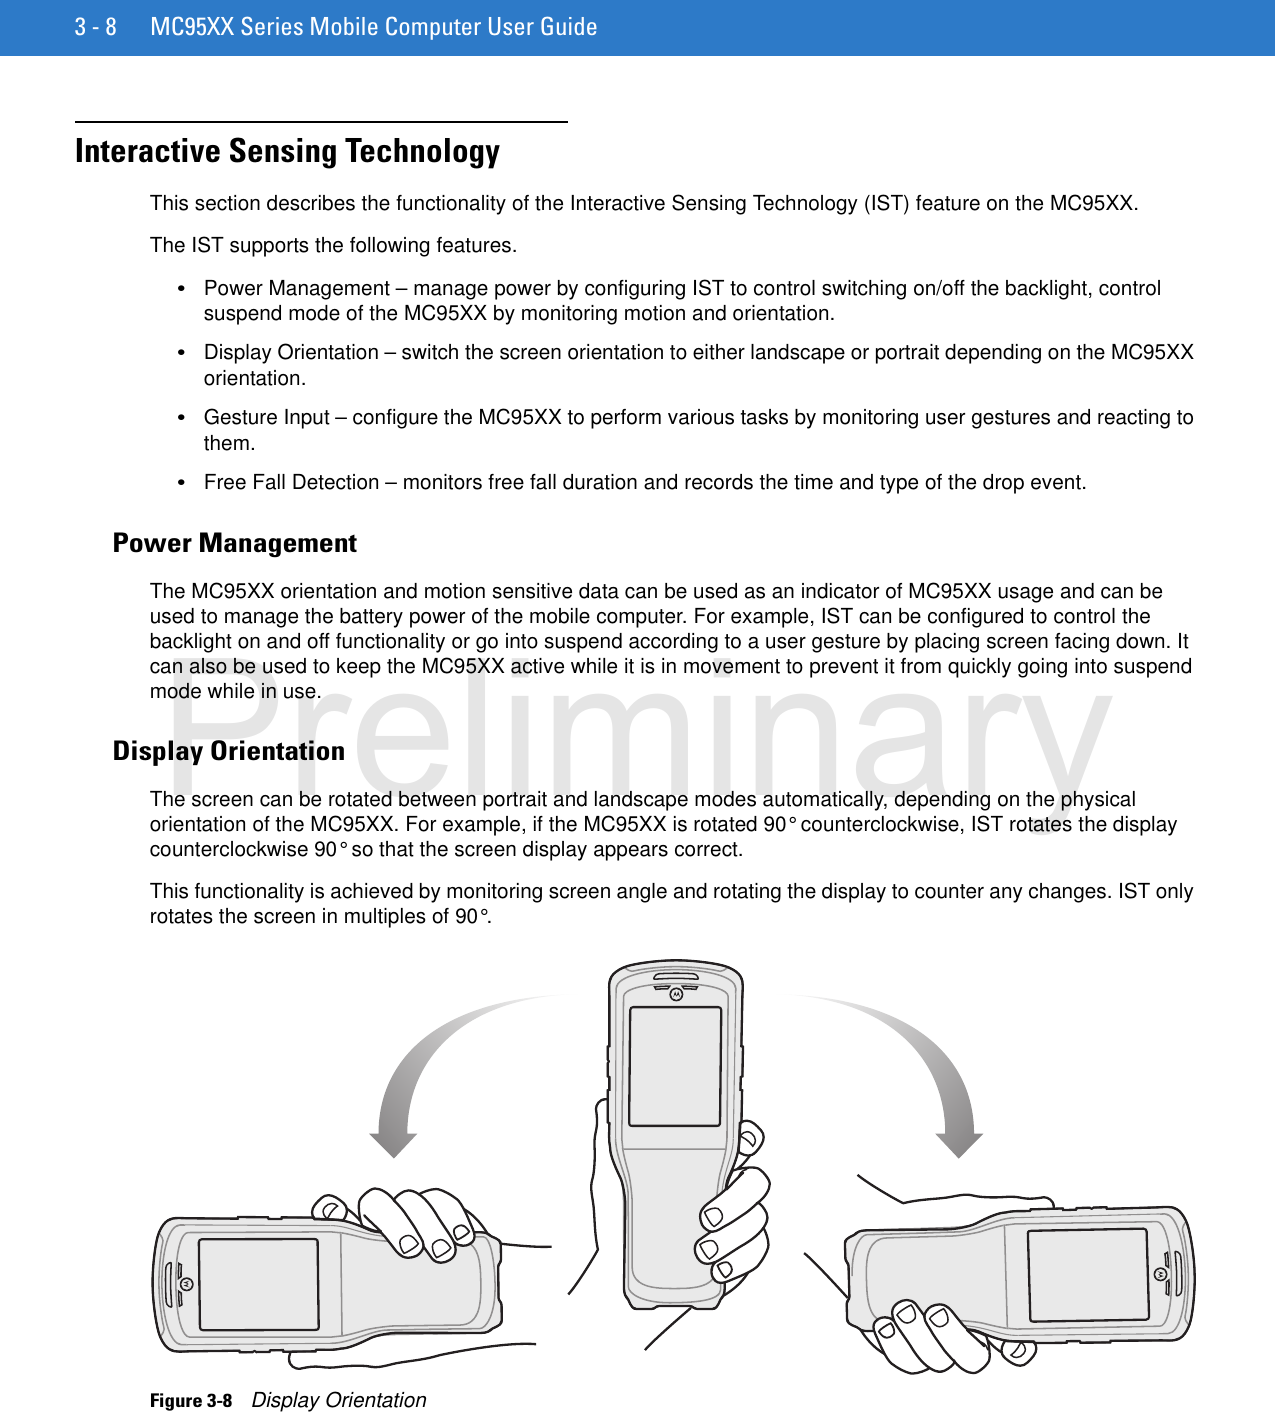 3 - 8 MC95XX Series Mobile Computer User GuideInteractive Sensing TechnologyThis section describes the functionality of the Interactive Sensing Technology (IST) feature on the MC95XX.The IST supports the following features.•Power Management – manage power by configuring IST to control switching on/off the backlight, control suspend mode of the MC95XX by monitoring motion and orientation.•Display Orientation – switch the screen orientation to either landscape or portrait depending on the MC95XX orientation.•Gesture Input – configure the MC95XX to perform various tasks by monitoring user gestures and reacting to them.•Free Fall Detection – monitors free fall duration and records the time and type of the drop event.Power ManagementThe MC95XX orientation and motion sensitive data can be used as an indicator of MC95XX usage and can be used to manage the battery power of the mobile computer. For example, IST can be configured to control the backlight on and off functionality or go into suspend according to a user gesture by placing screen facing down. It can also be used to keep the MC95XX active while it is in movement to prevent it from quickly going into suspend mode while in use.Display OrientationThe screen can be rotated between portrait and landscape modes automatically, depending on the physical orientation of the MC95XX. For example, if the MC95XX is rotated 90° counterclockwise, IST rotates the display counterclockwise 90° so that the screen display appears correct.This functionality is achieved by monitoring screen angle and rotating the display to counter any changes. IST only rotates the screen in multiples of 90°.Figure 3-8    Display OrientationPreliminary